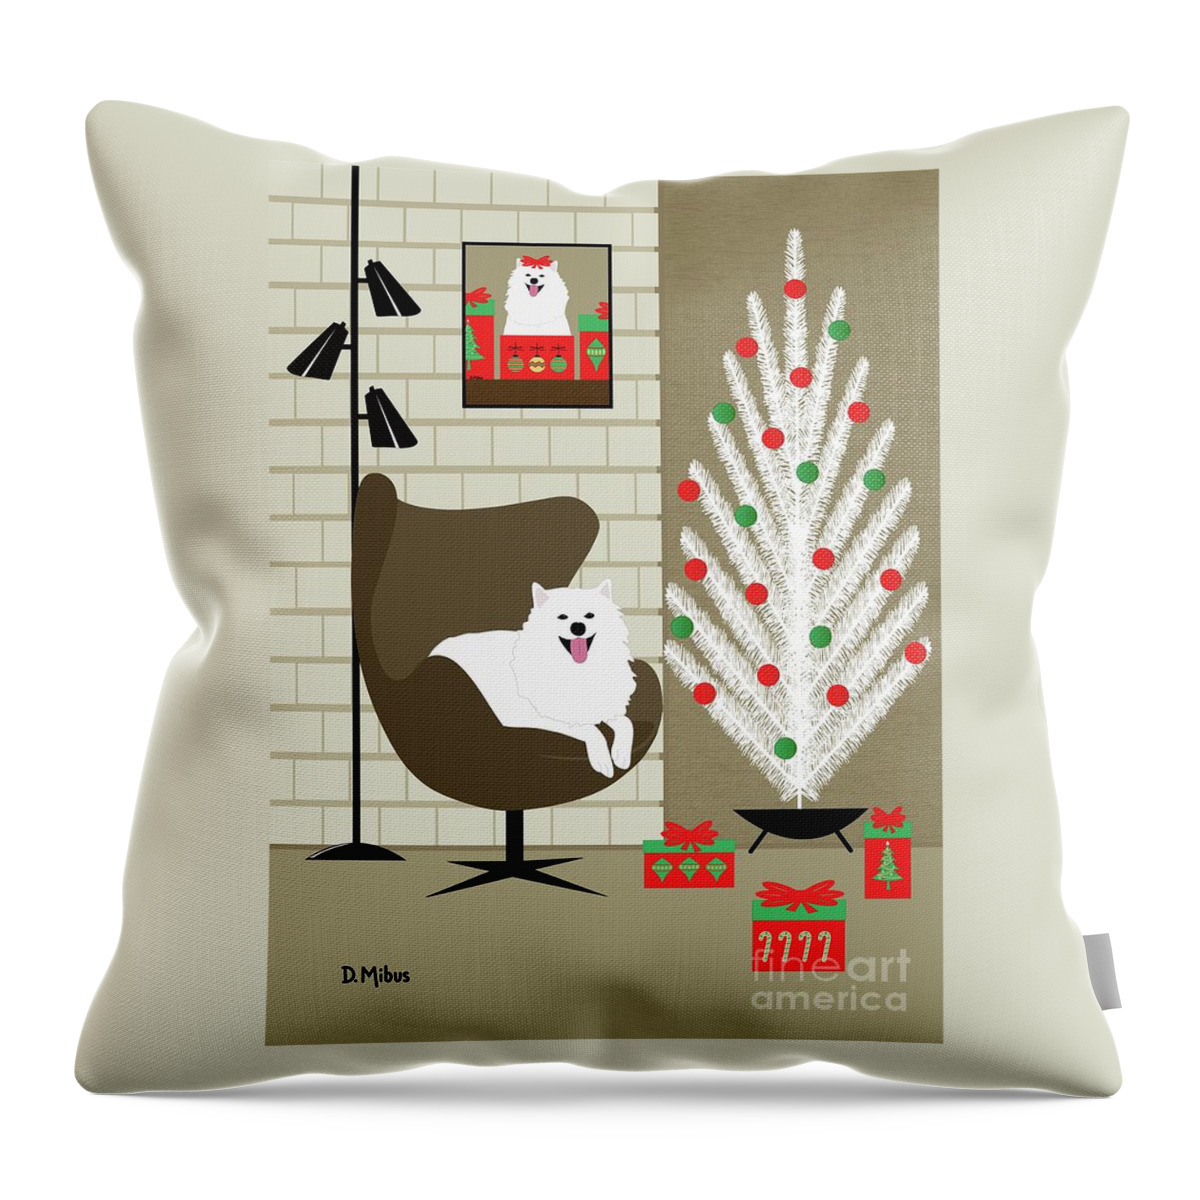 Mid Century Dog Throw Pillow featuring the digital art Christmas Room with Eskimo Dog by Donna Mibus